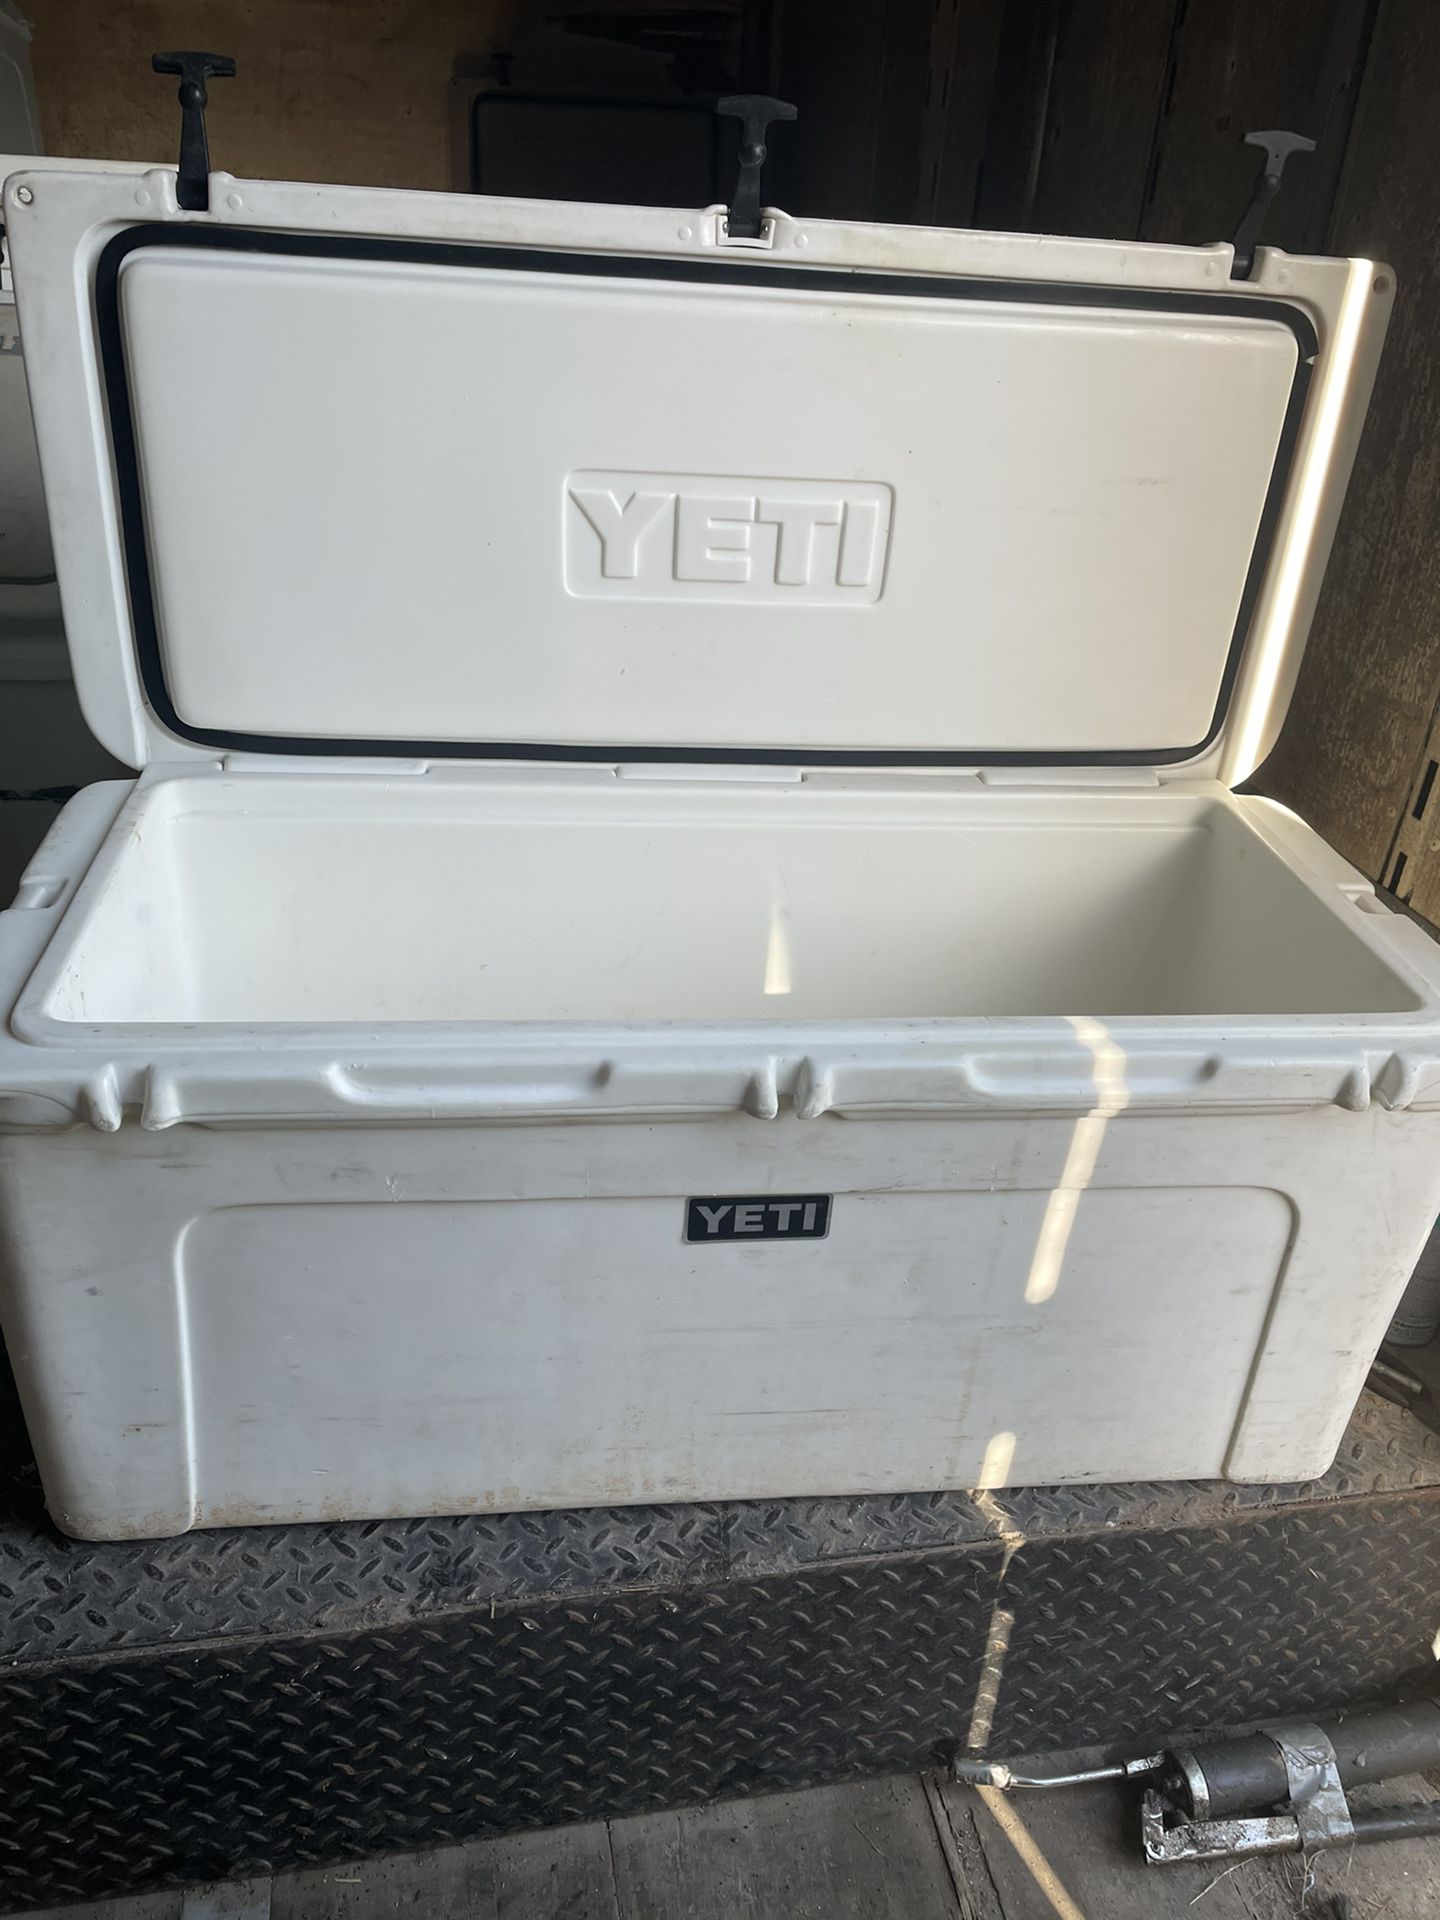 Harvest Red Yeti 35 Cooler for Sale in San Antonio, TX - OfferUp